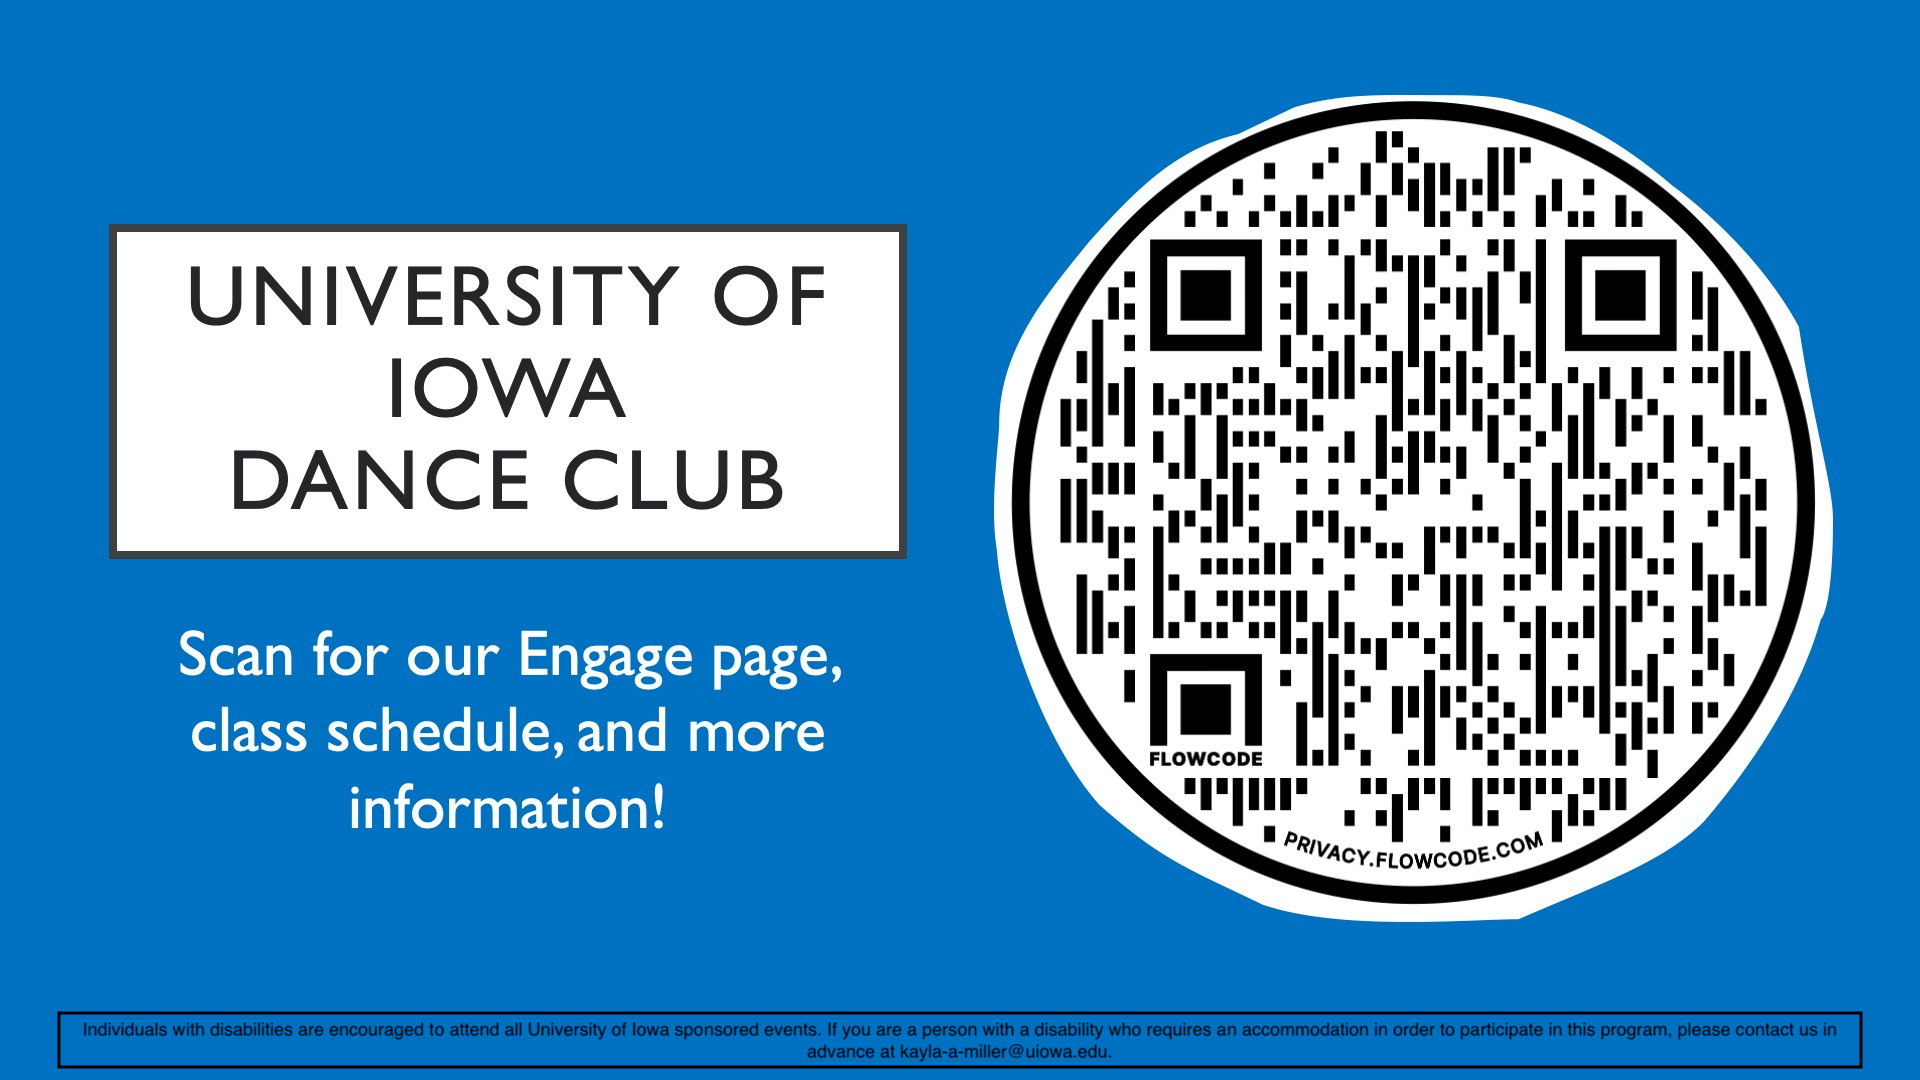 University of Iowa Dance Club. Scan for our Engage page, class schedule, and more information!